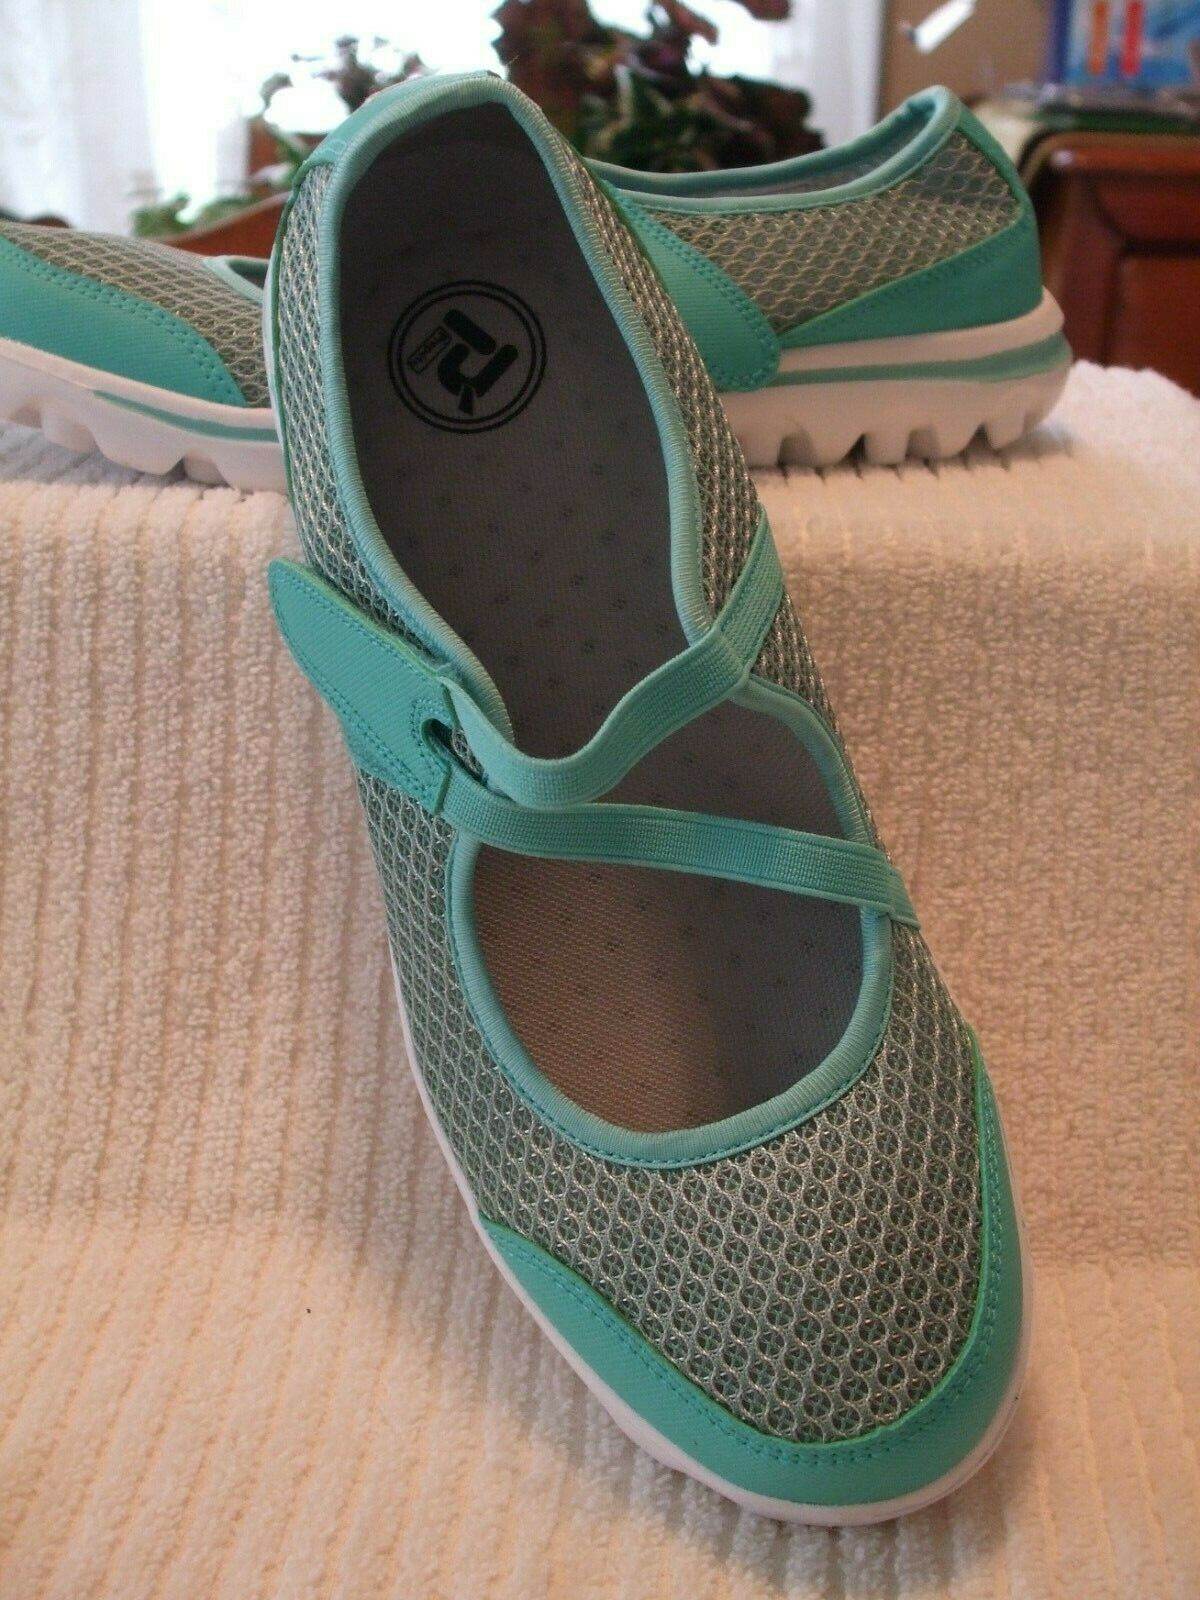 NEW PROPET TRAVELACTIV WALKING SHOES,MARY JO, TURQUOISE, SZ 9.5 MED, FROM QVC